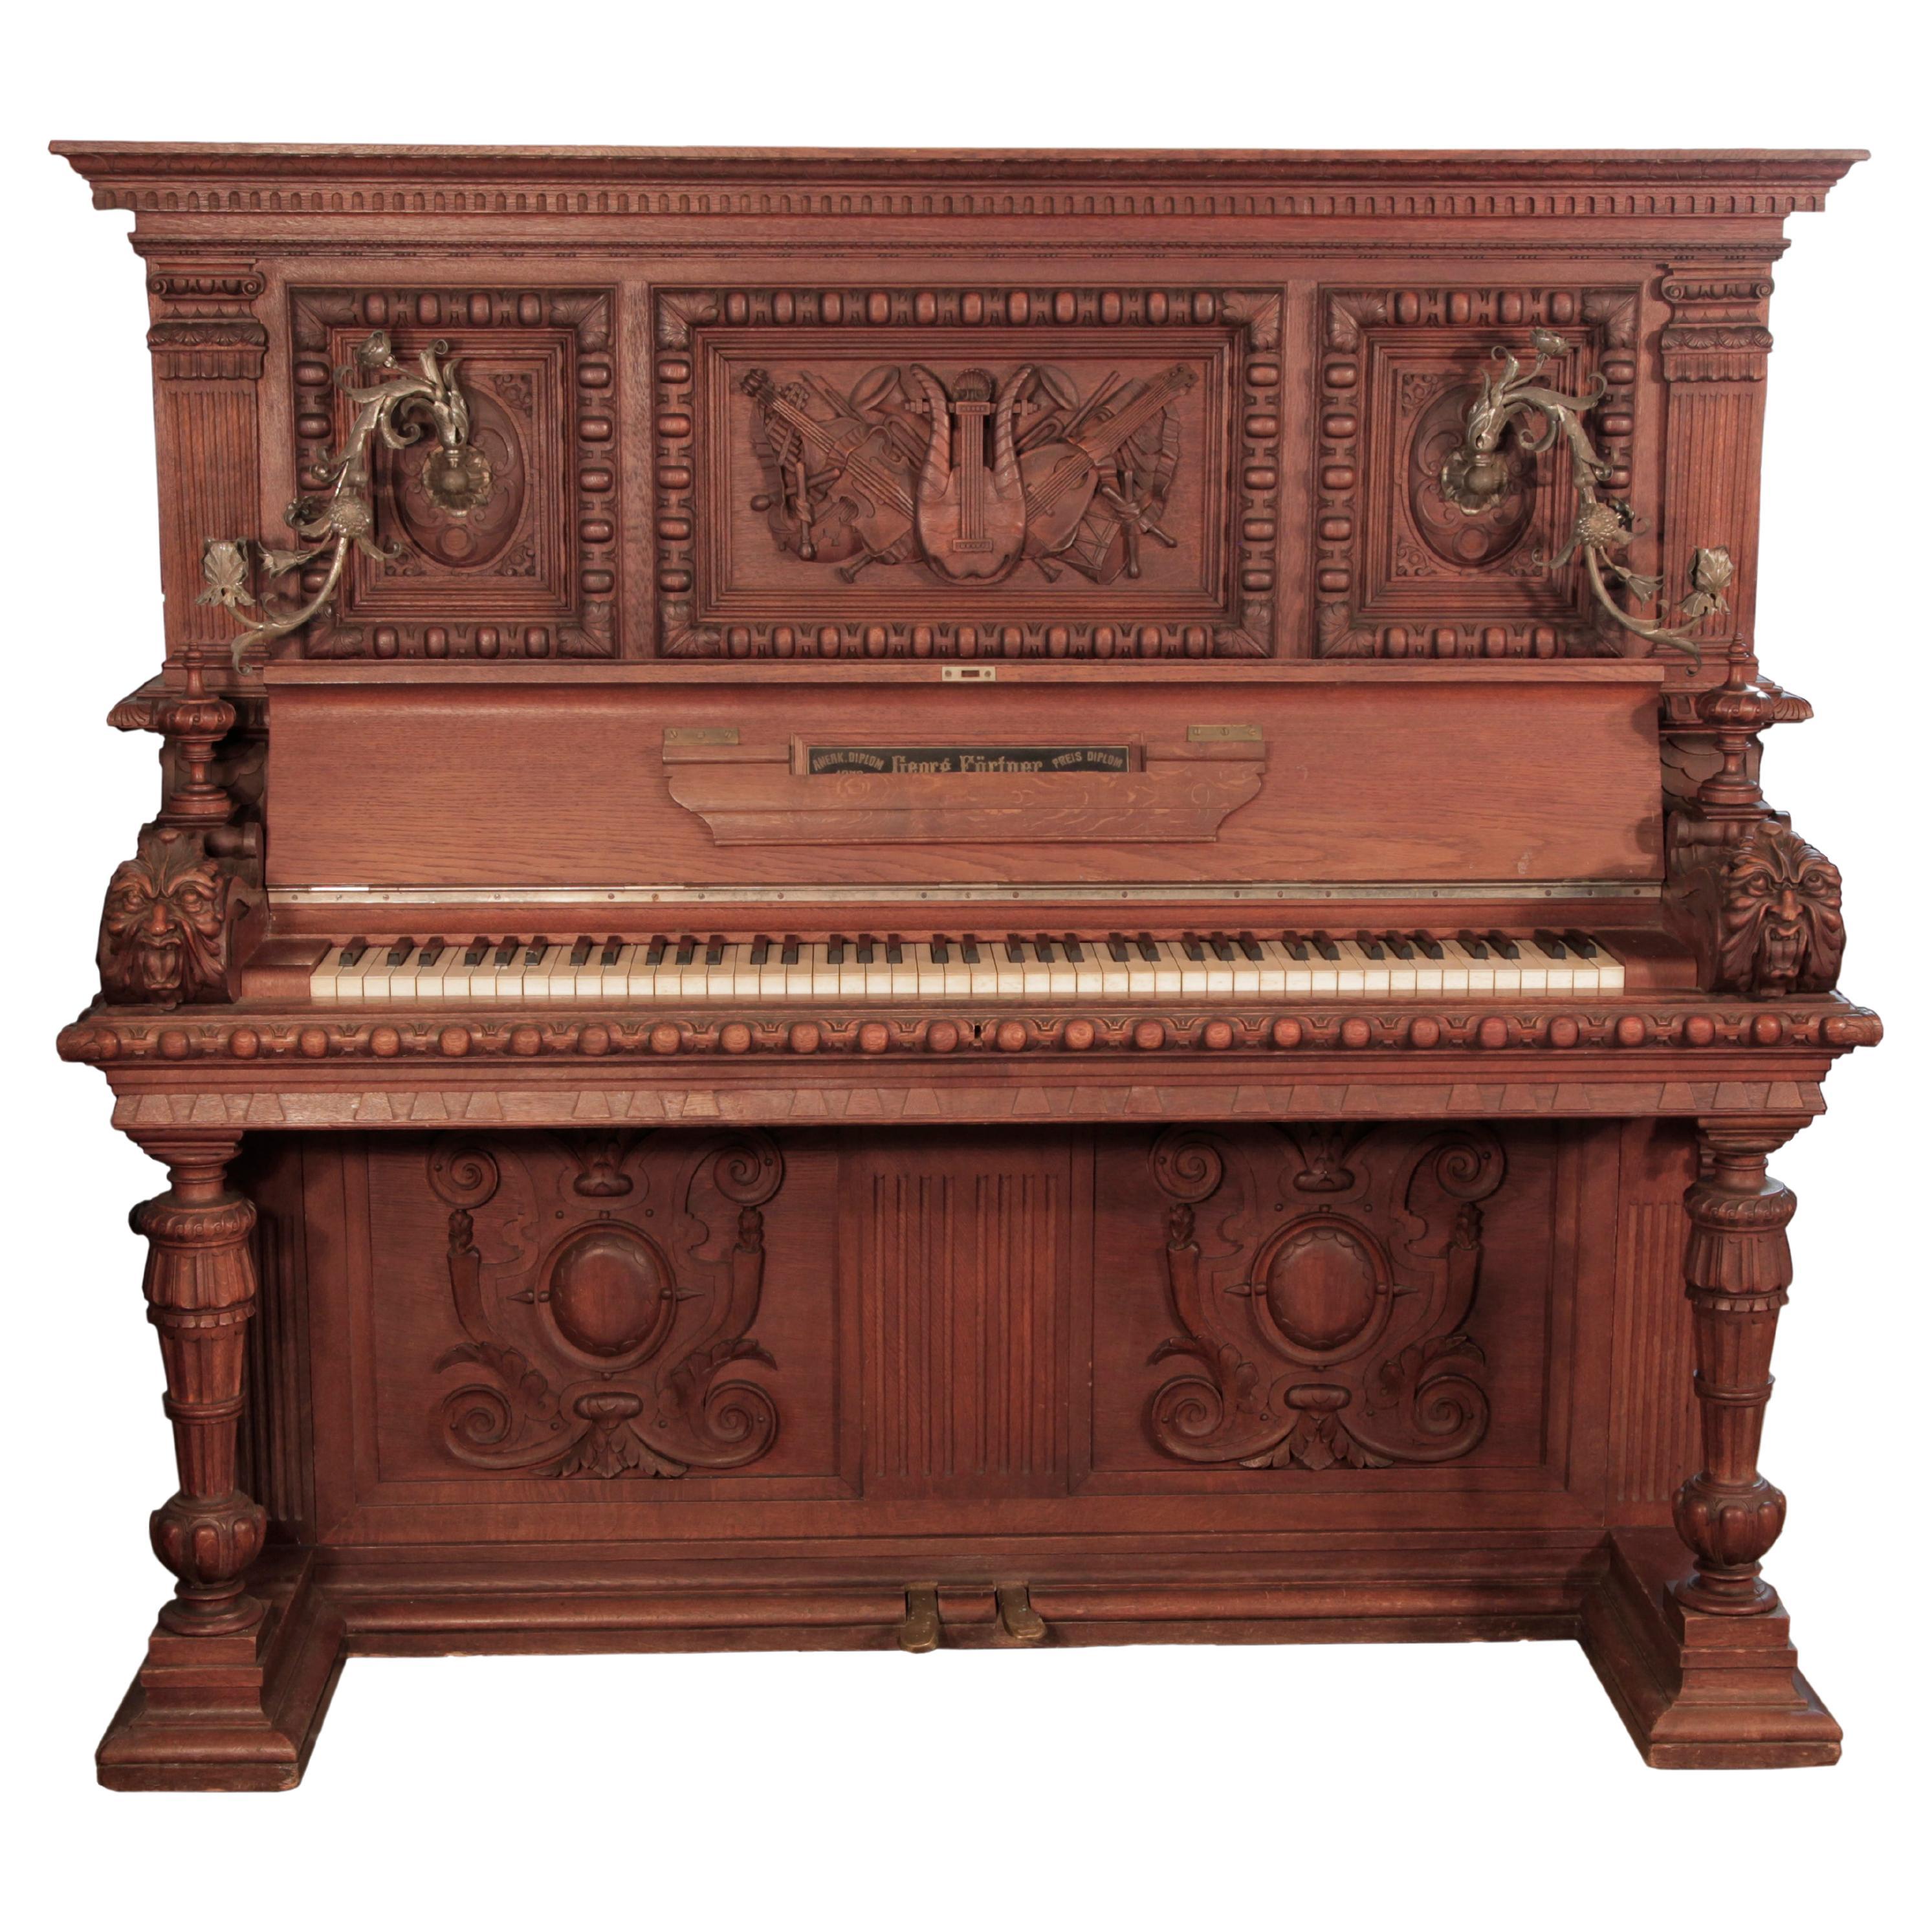 Georg Fortner Upright Piano Mahogany High Relief Carvings by Julius Bechler For Sale